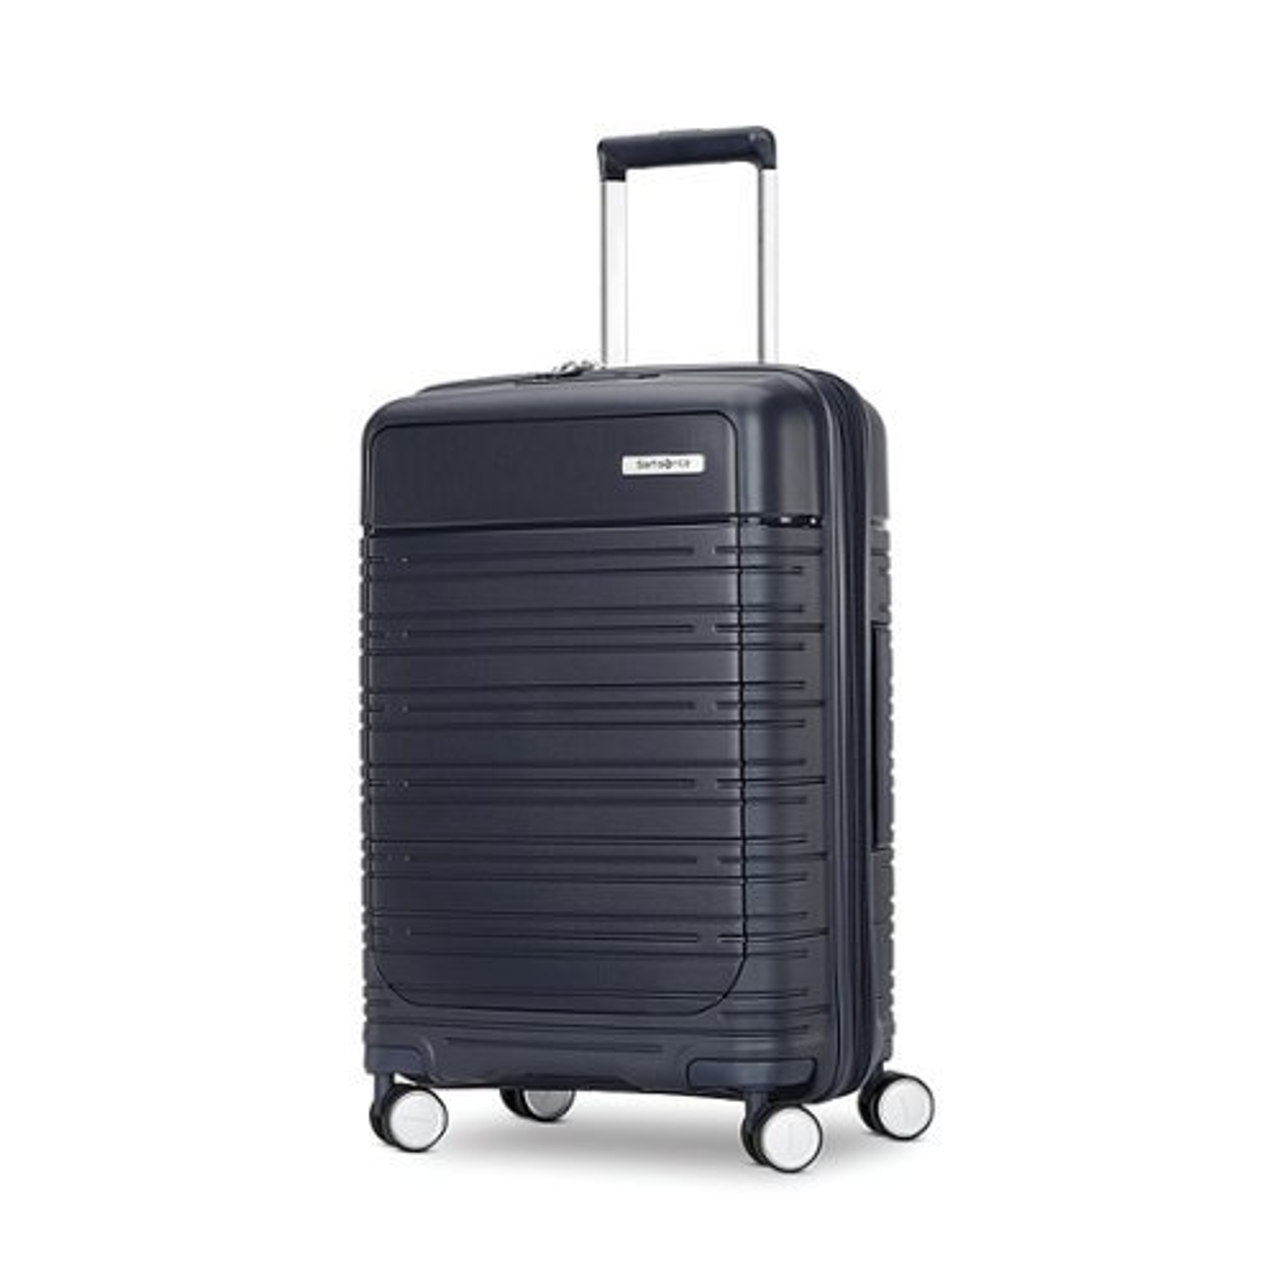 Samsonite - Elevation Plus 21" Expandable Carry-On Spinner Suitcase - Midnight Blue